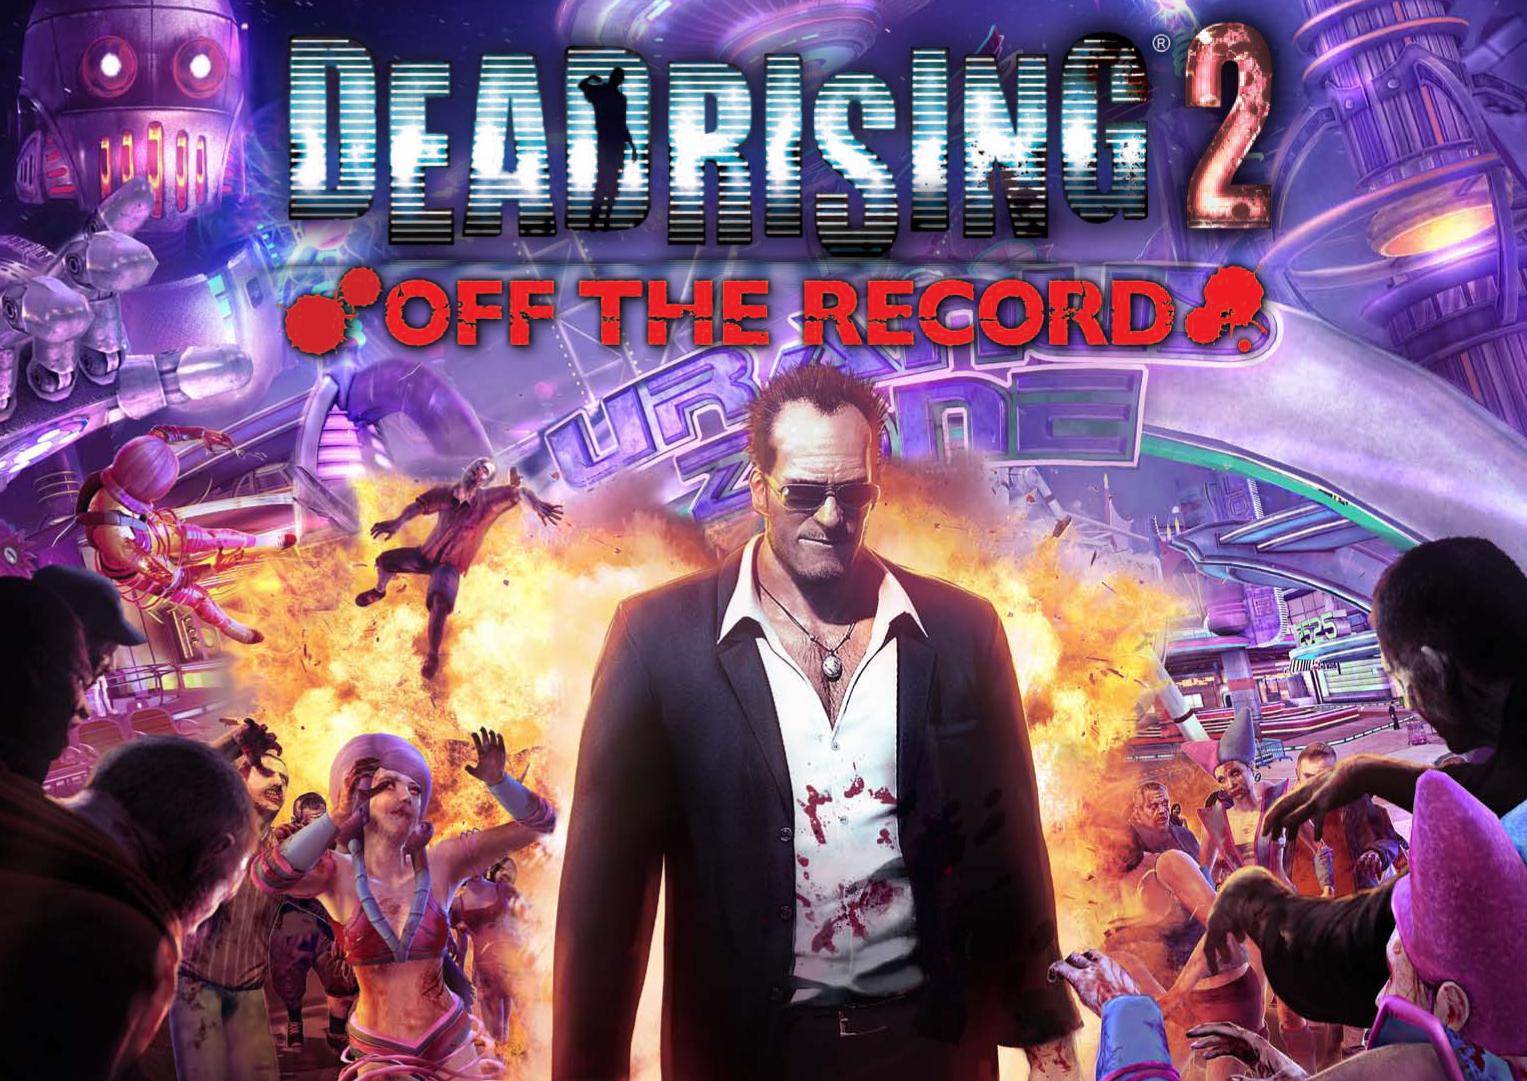 dead-rising-2-off-the-record-windows-x360-ps3-game-moddb